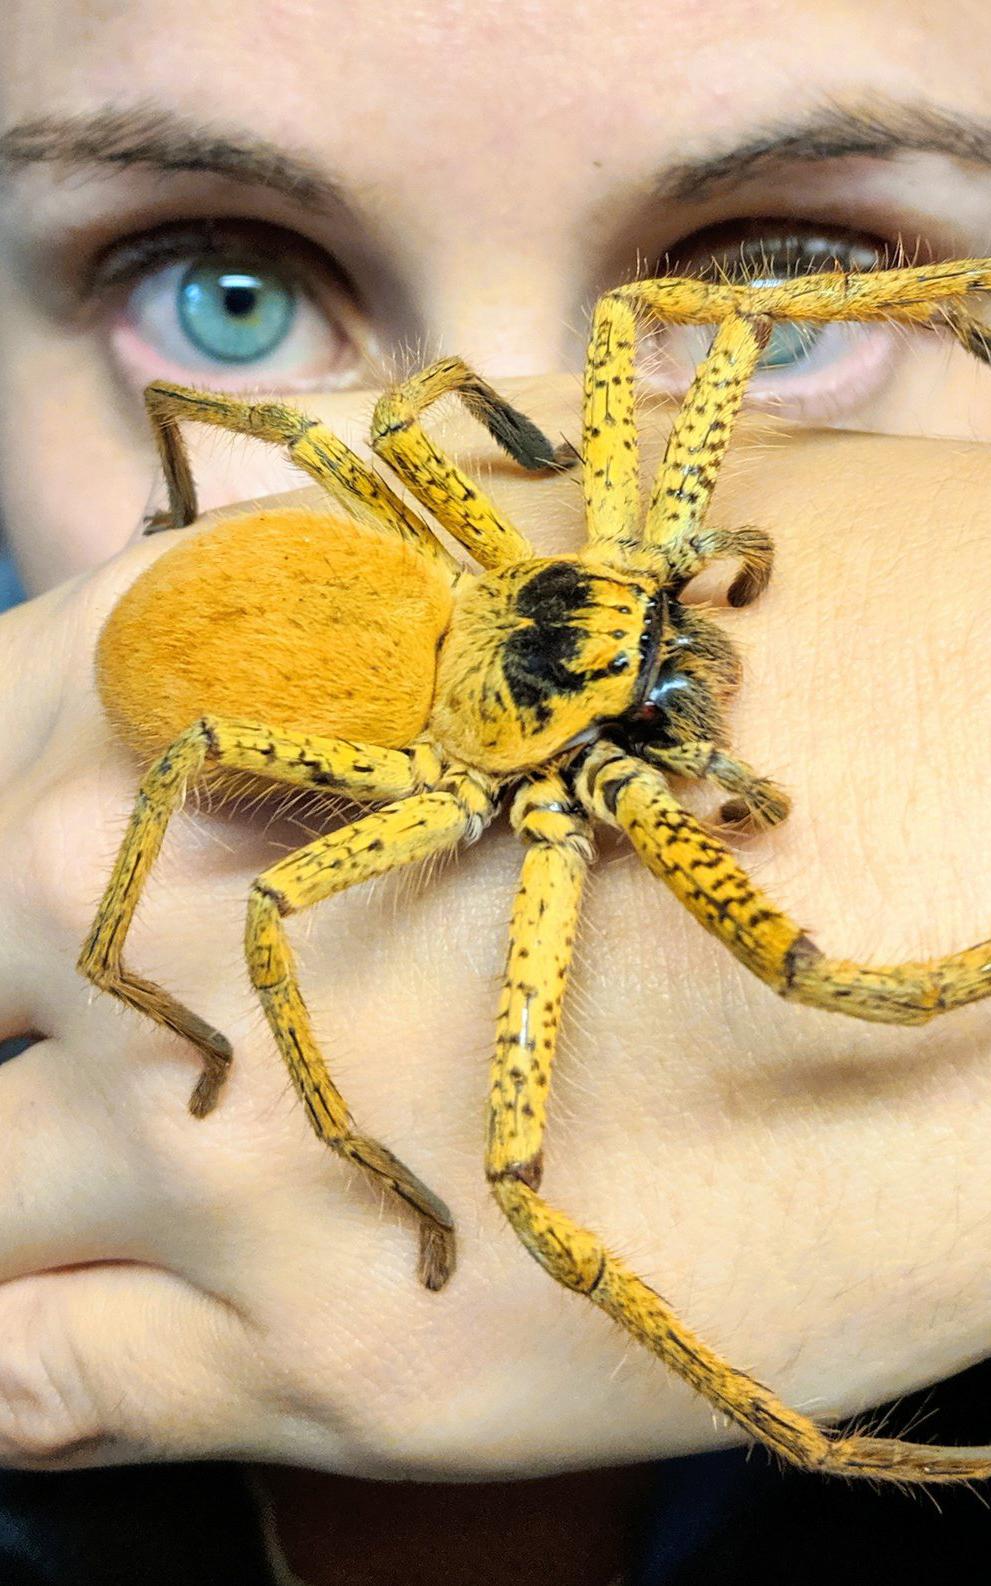 Beautiful News-woman with spider on hand